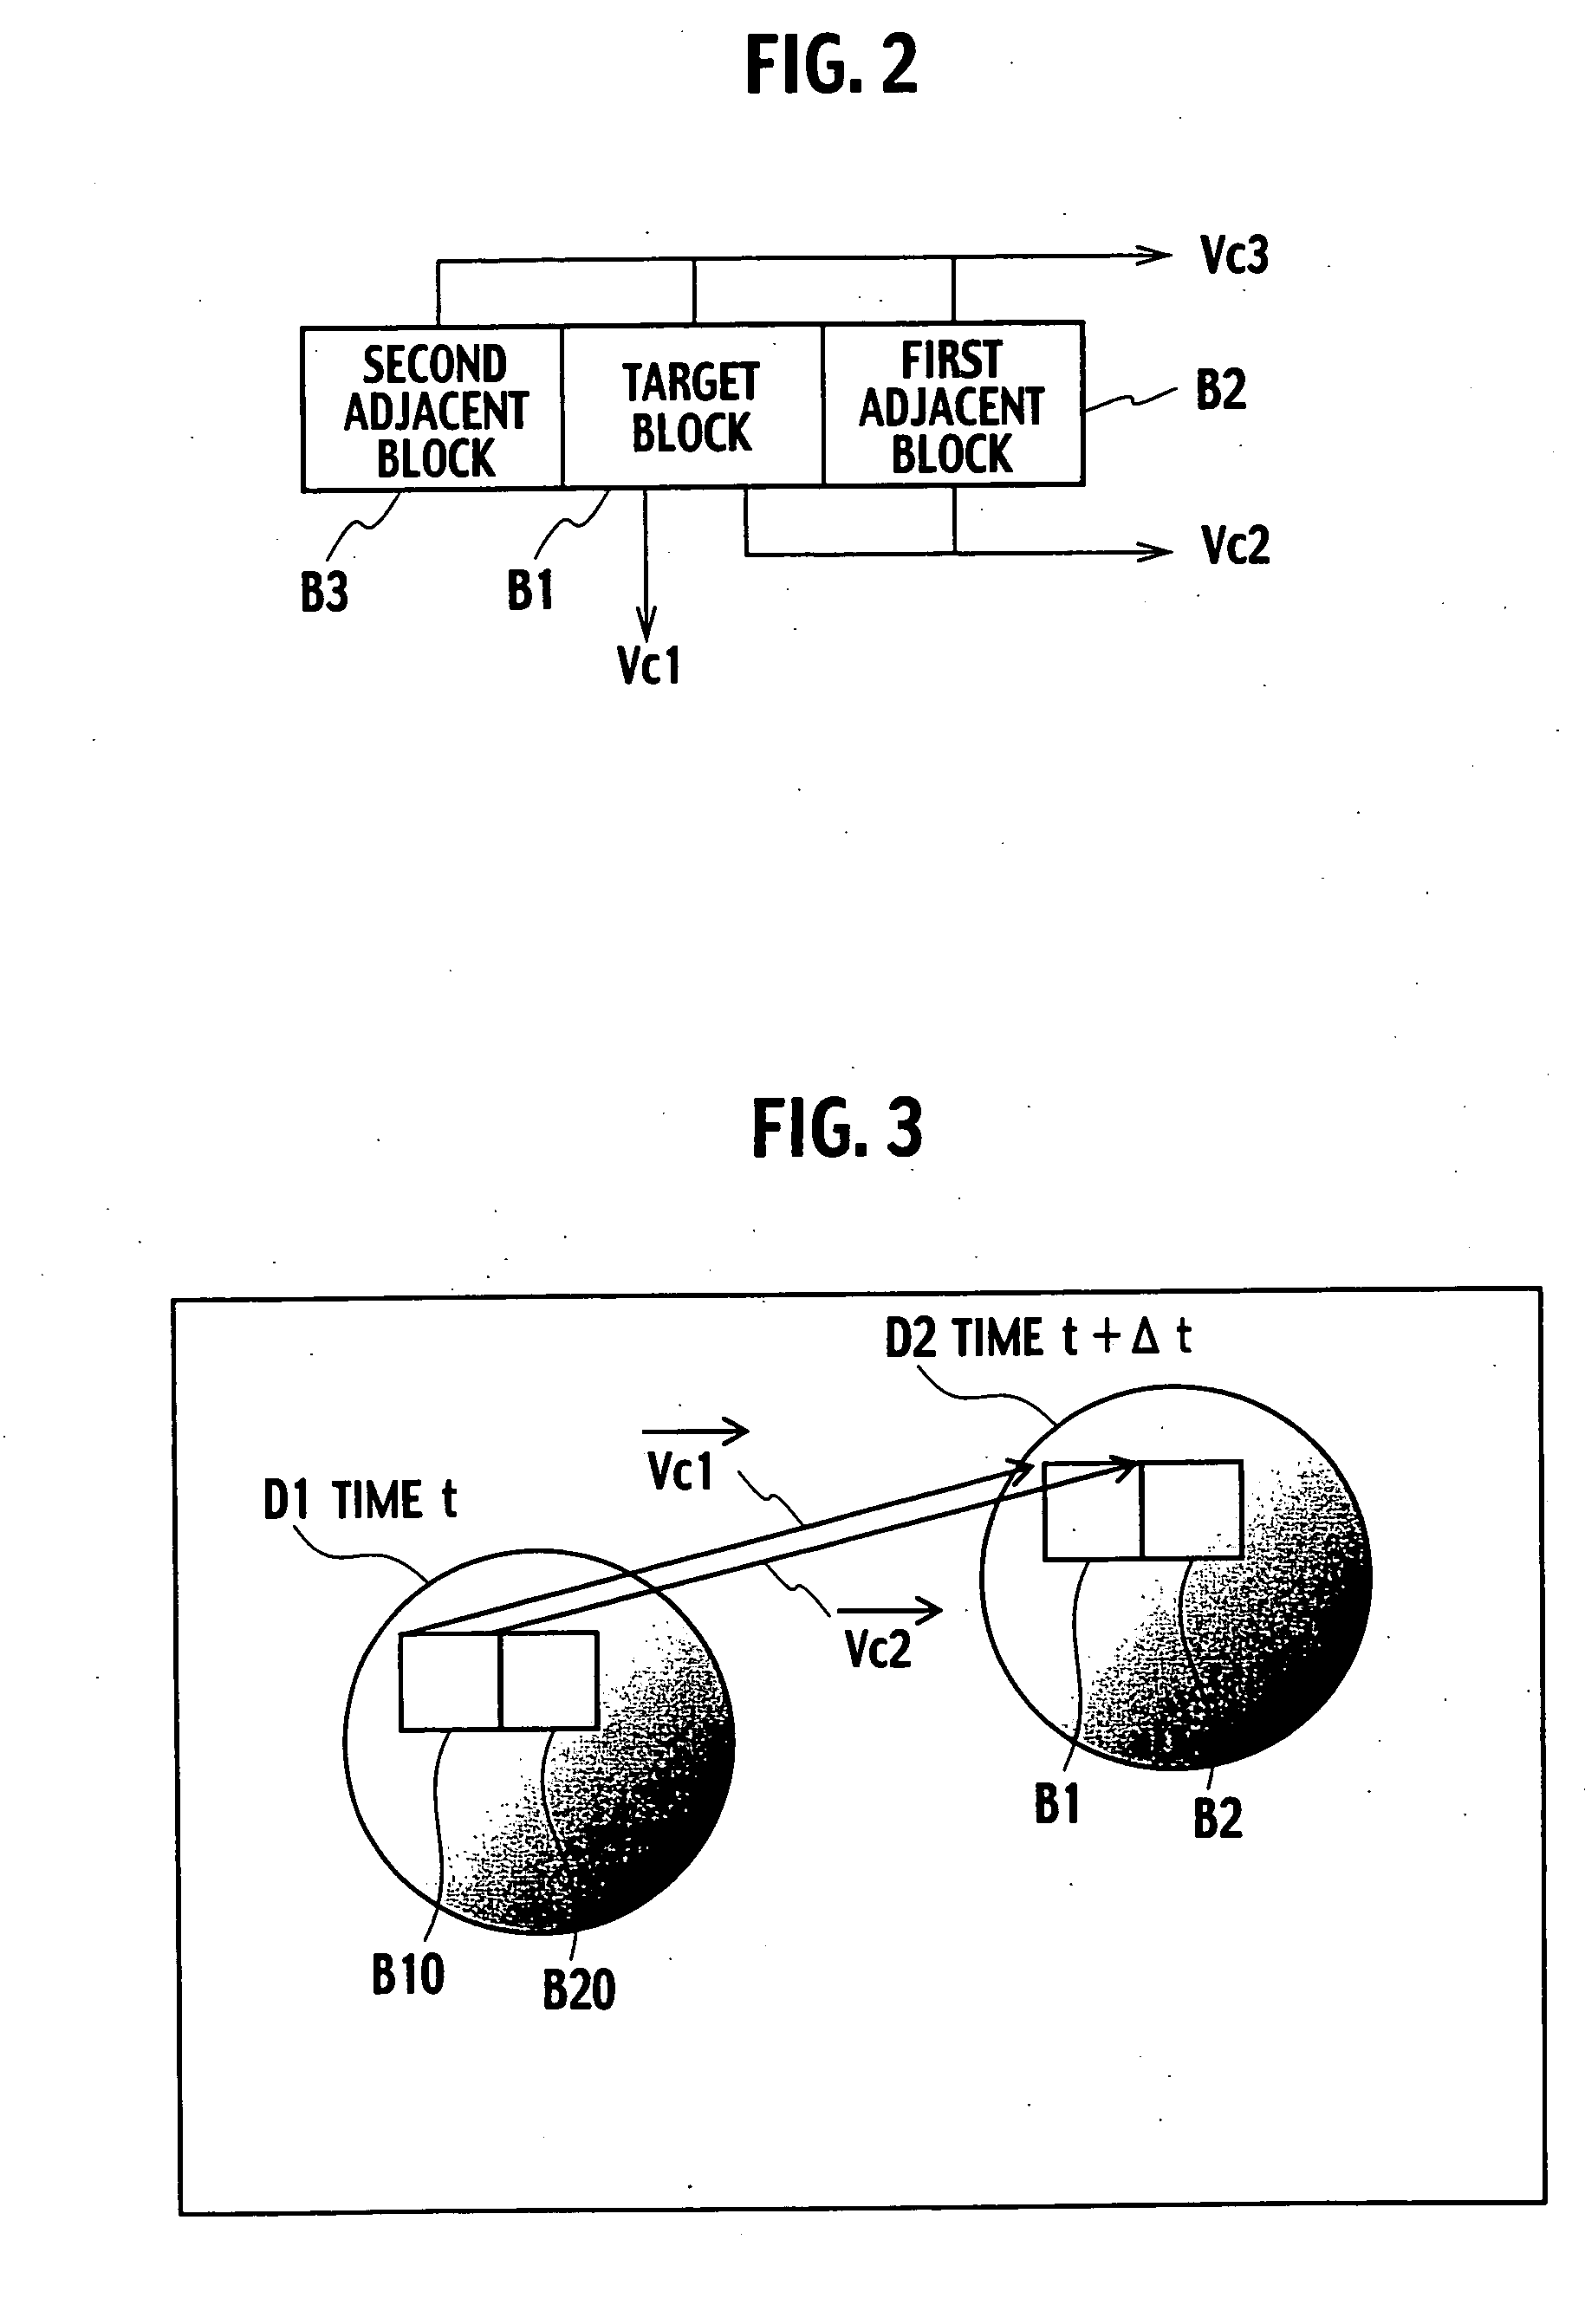 Moving picture processor, method for processing a moving picture, and computer program product for executing an application for a moving picture processor